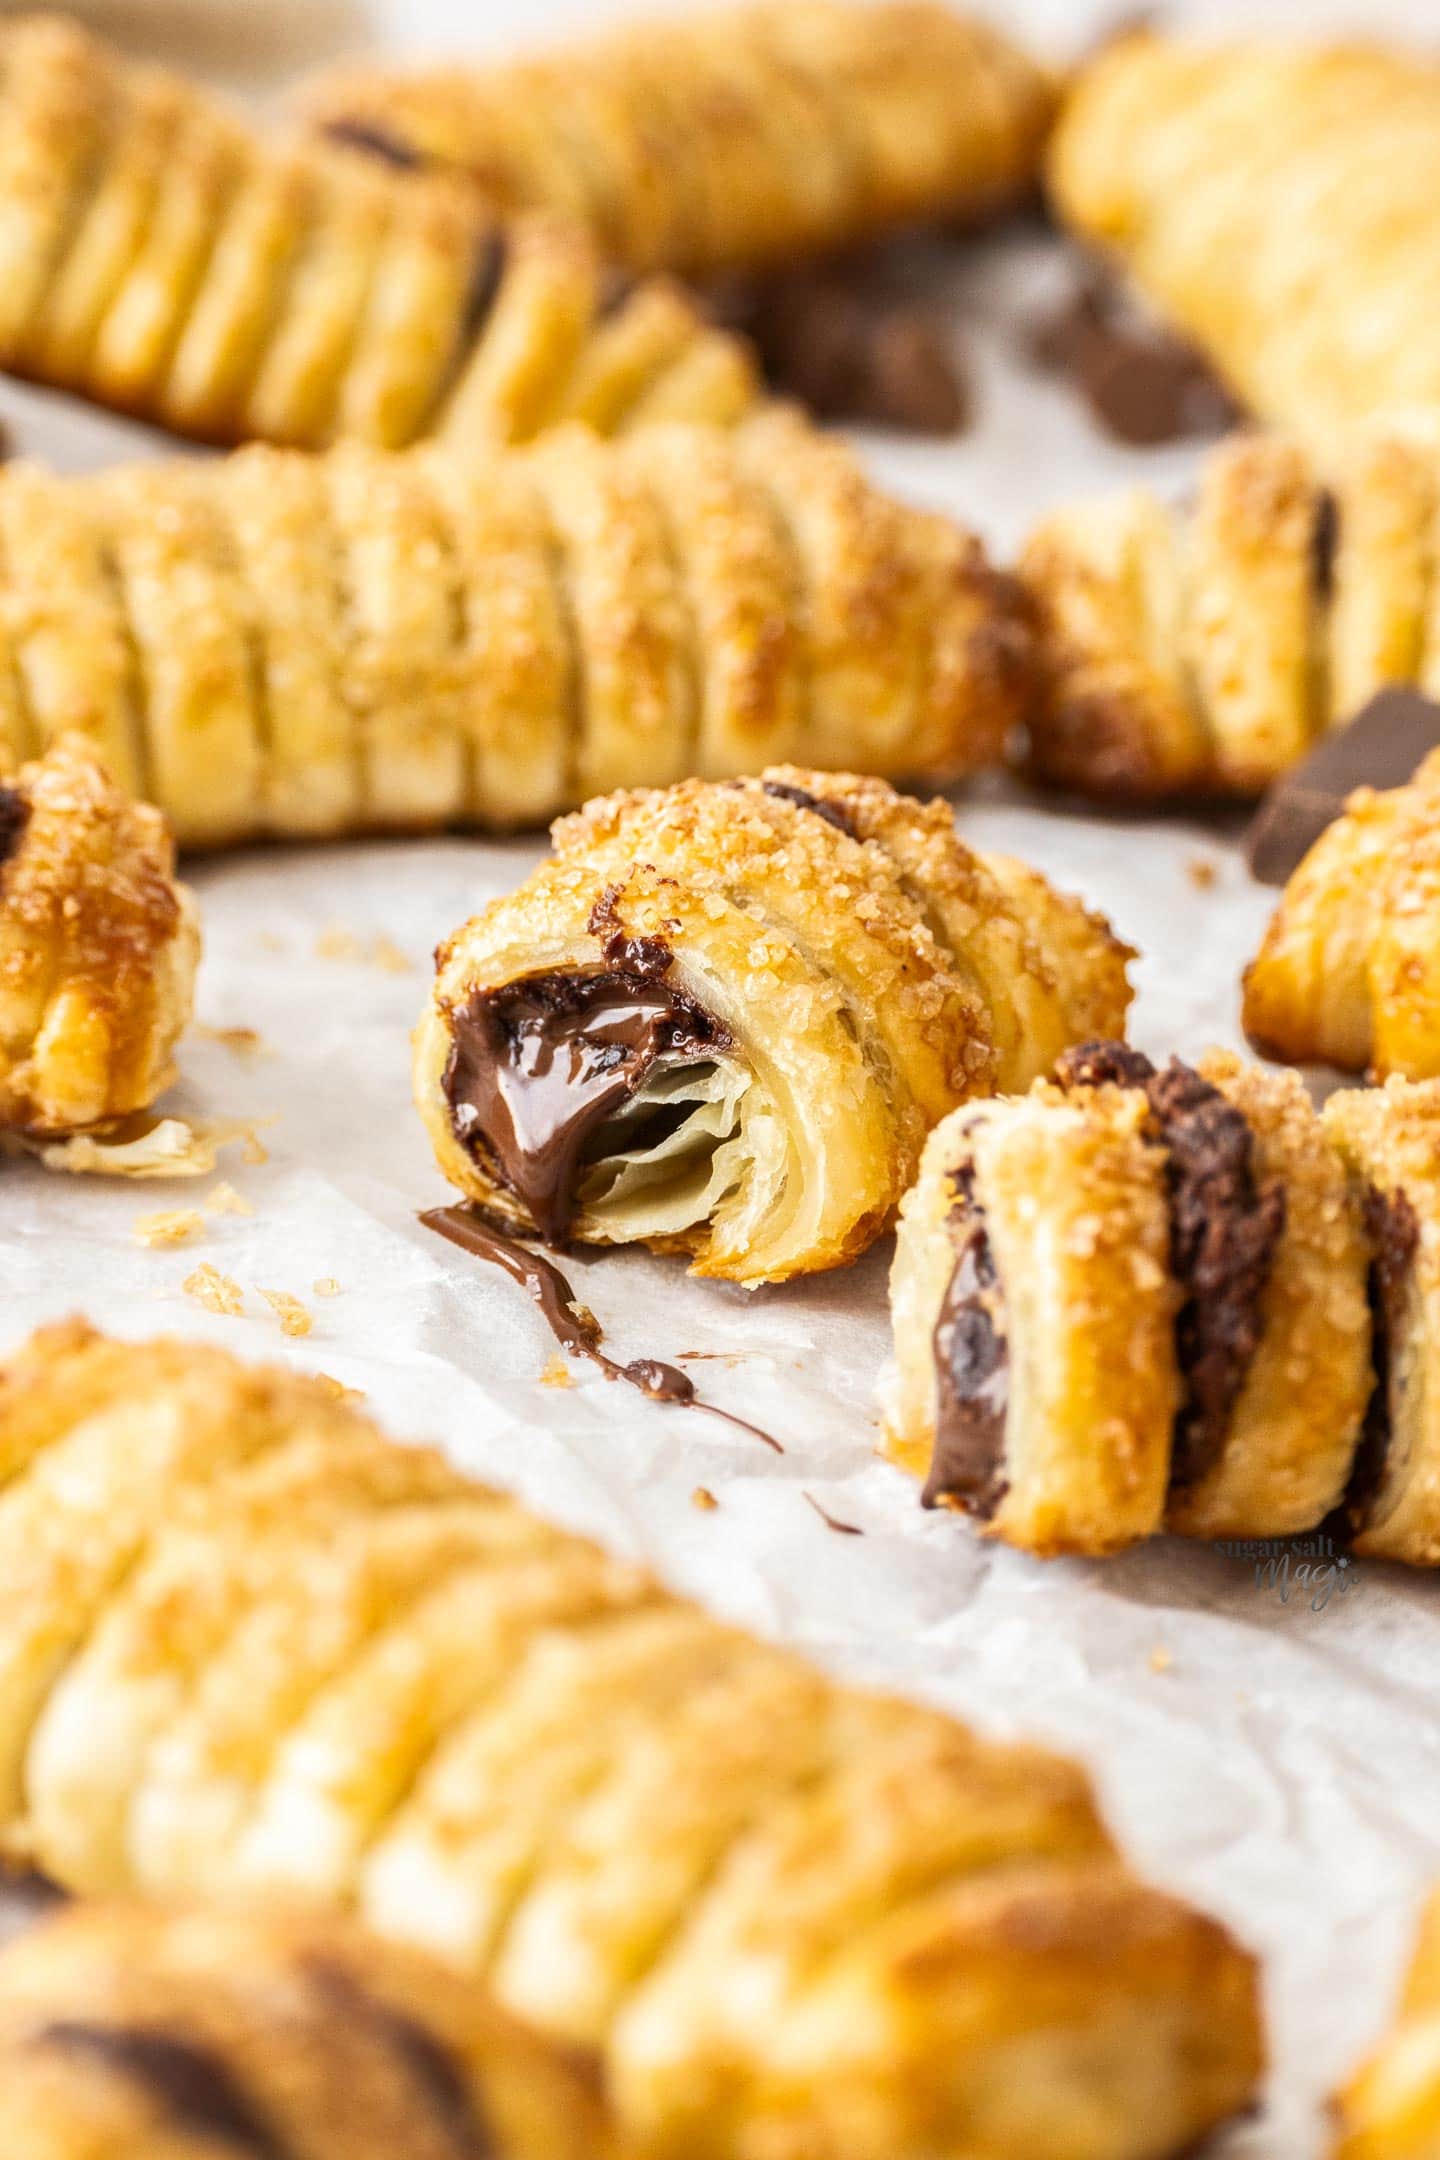 A chocolate puff pastry broken open to show the gooey chocolate inside.